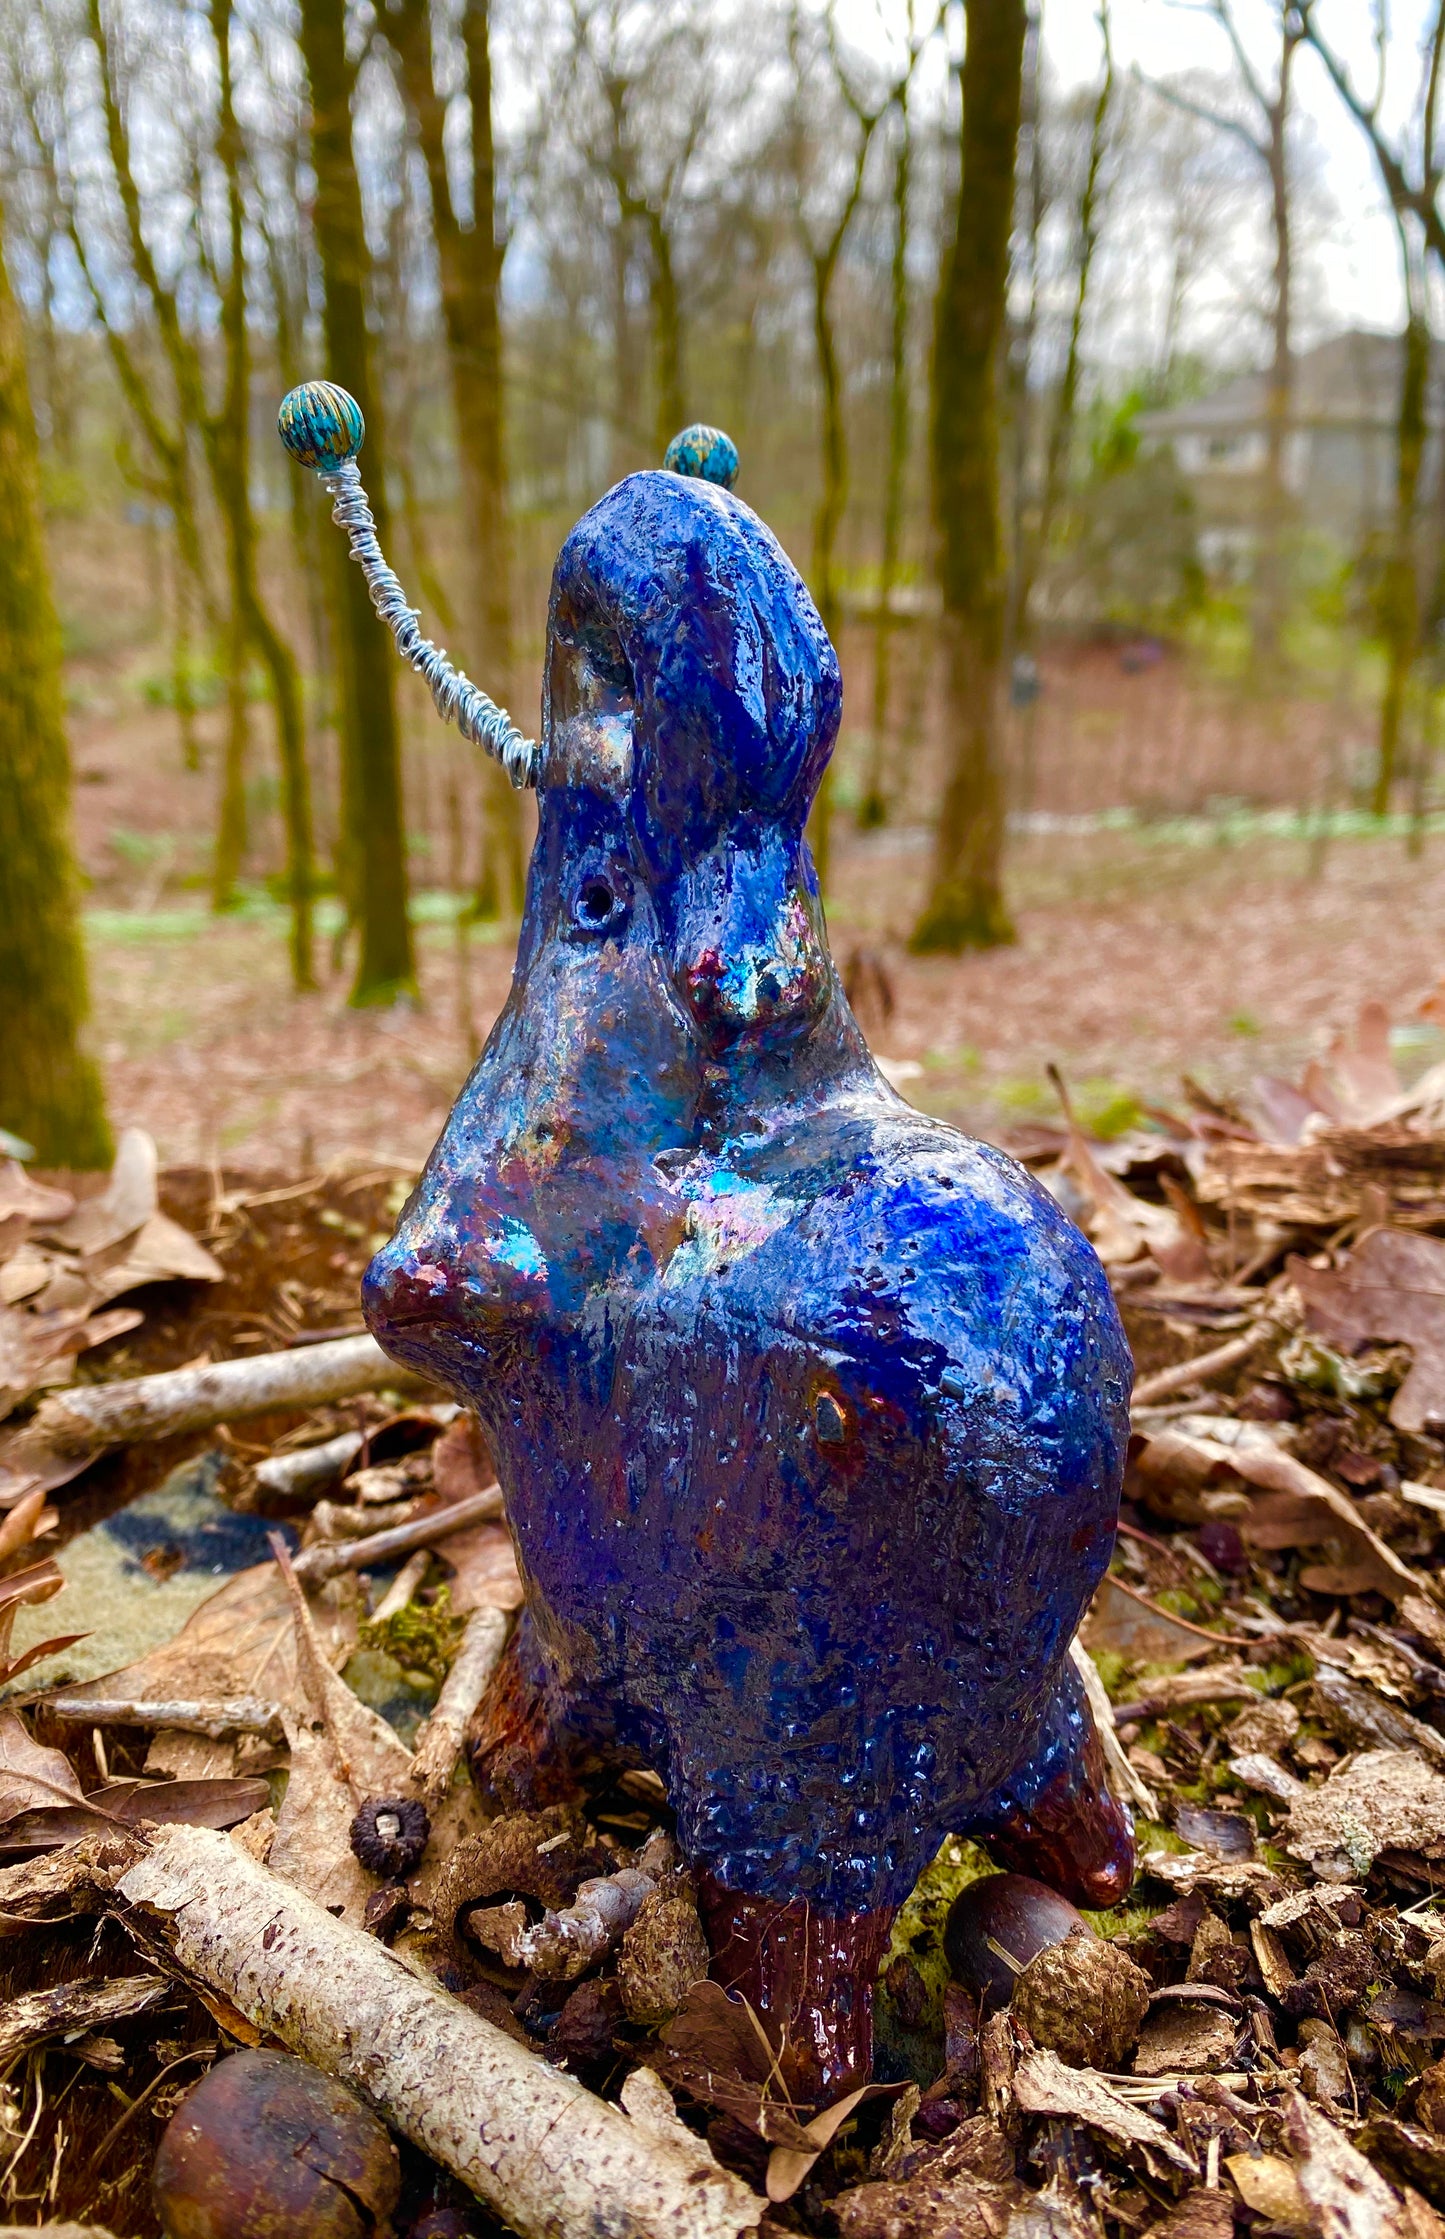 Have you HERD!!!!!!  Just one of these lovely Raku Fired Elephant will make an excellent gift for your  friend, sorority or for your home’ special place centerpiece.  7" x 4" x 4" 15 ozs. Silver wire beaded blue tusk Beautiful metallic blue raku colors For decorative purposely only.